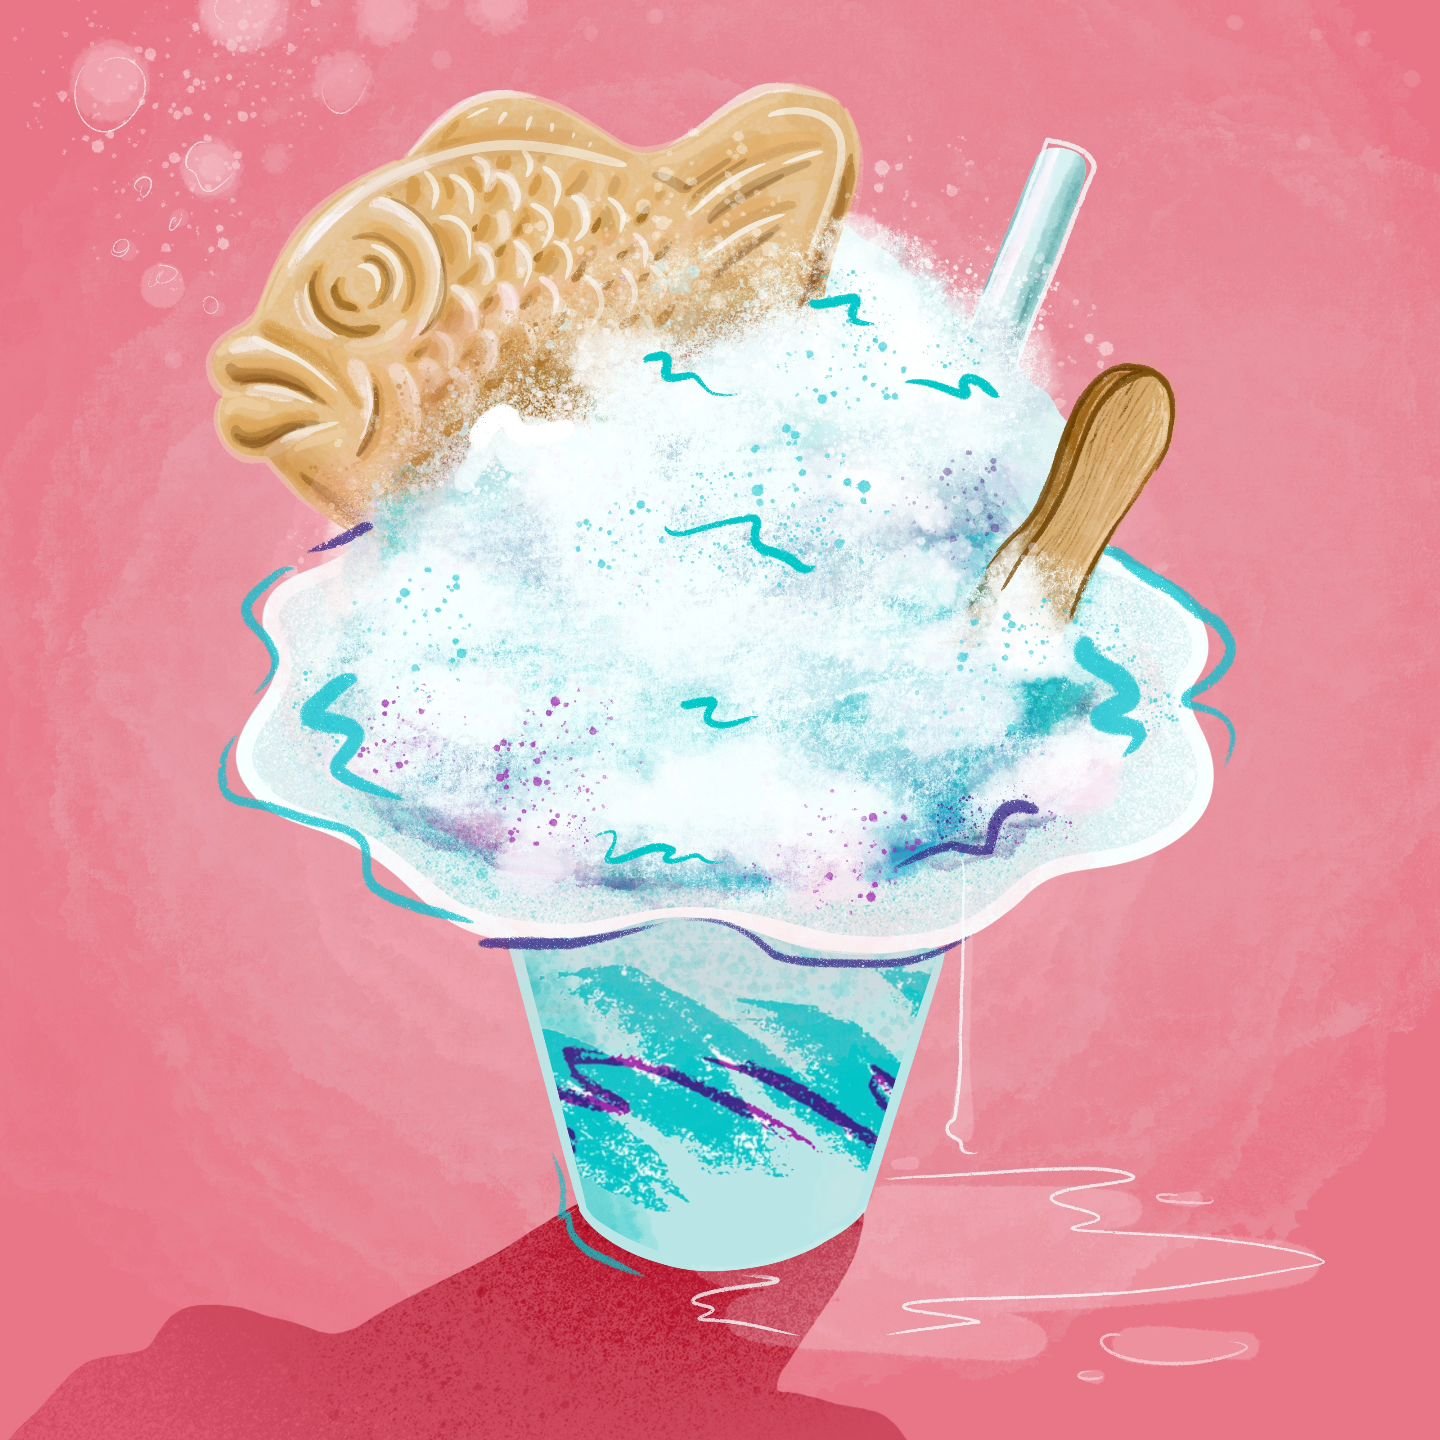 Alohactober Day 21! Just a little filler image of some 90s insipered red bean shave ice! It's a silly idea, but honestly, I like how it turned out, might mess around, and make a sticker... ! 🫘🍦🐠
.
.
.
#shaveice #shaveicesticker #redbeanfish #feees